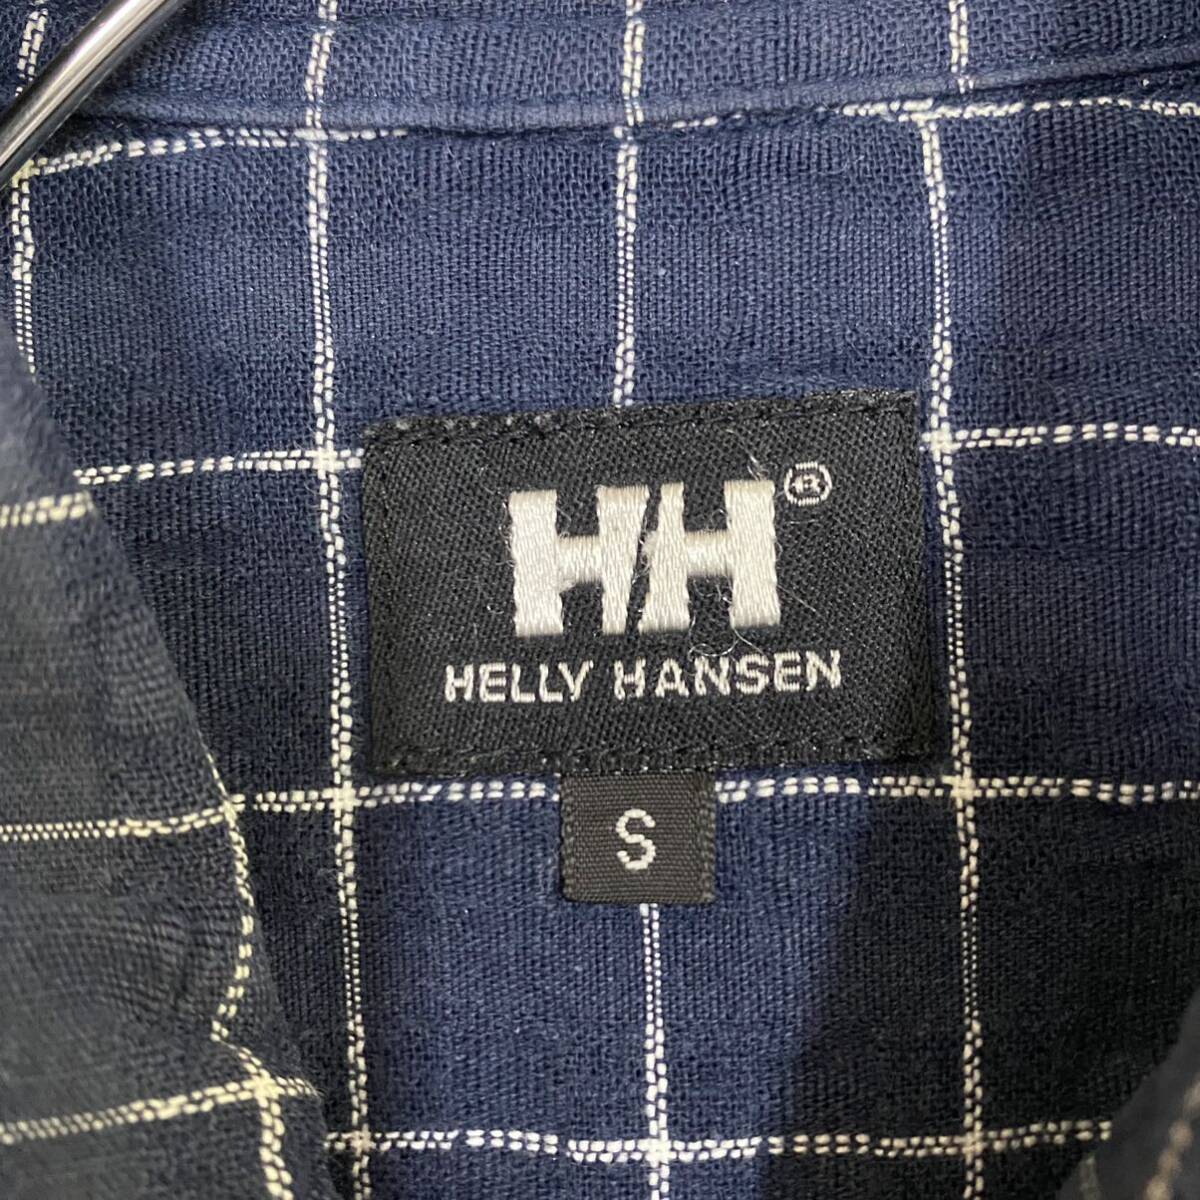 HELLY HANSEN Helly Hansen long sleeve shirt check shirt size S navy navy blue color men's tops there is no highest bid (I17)